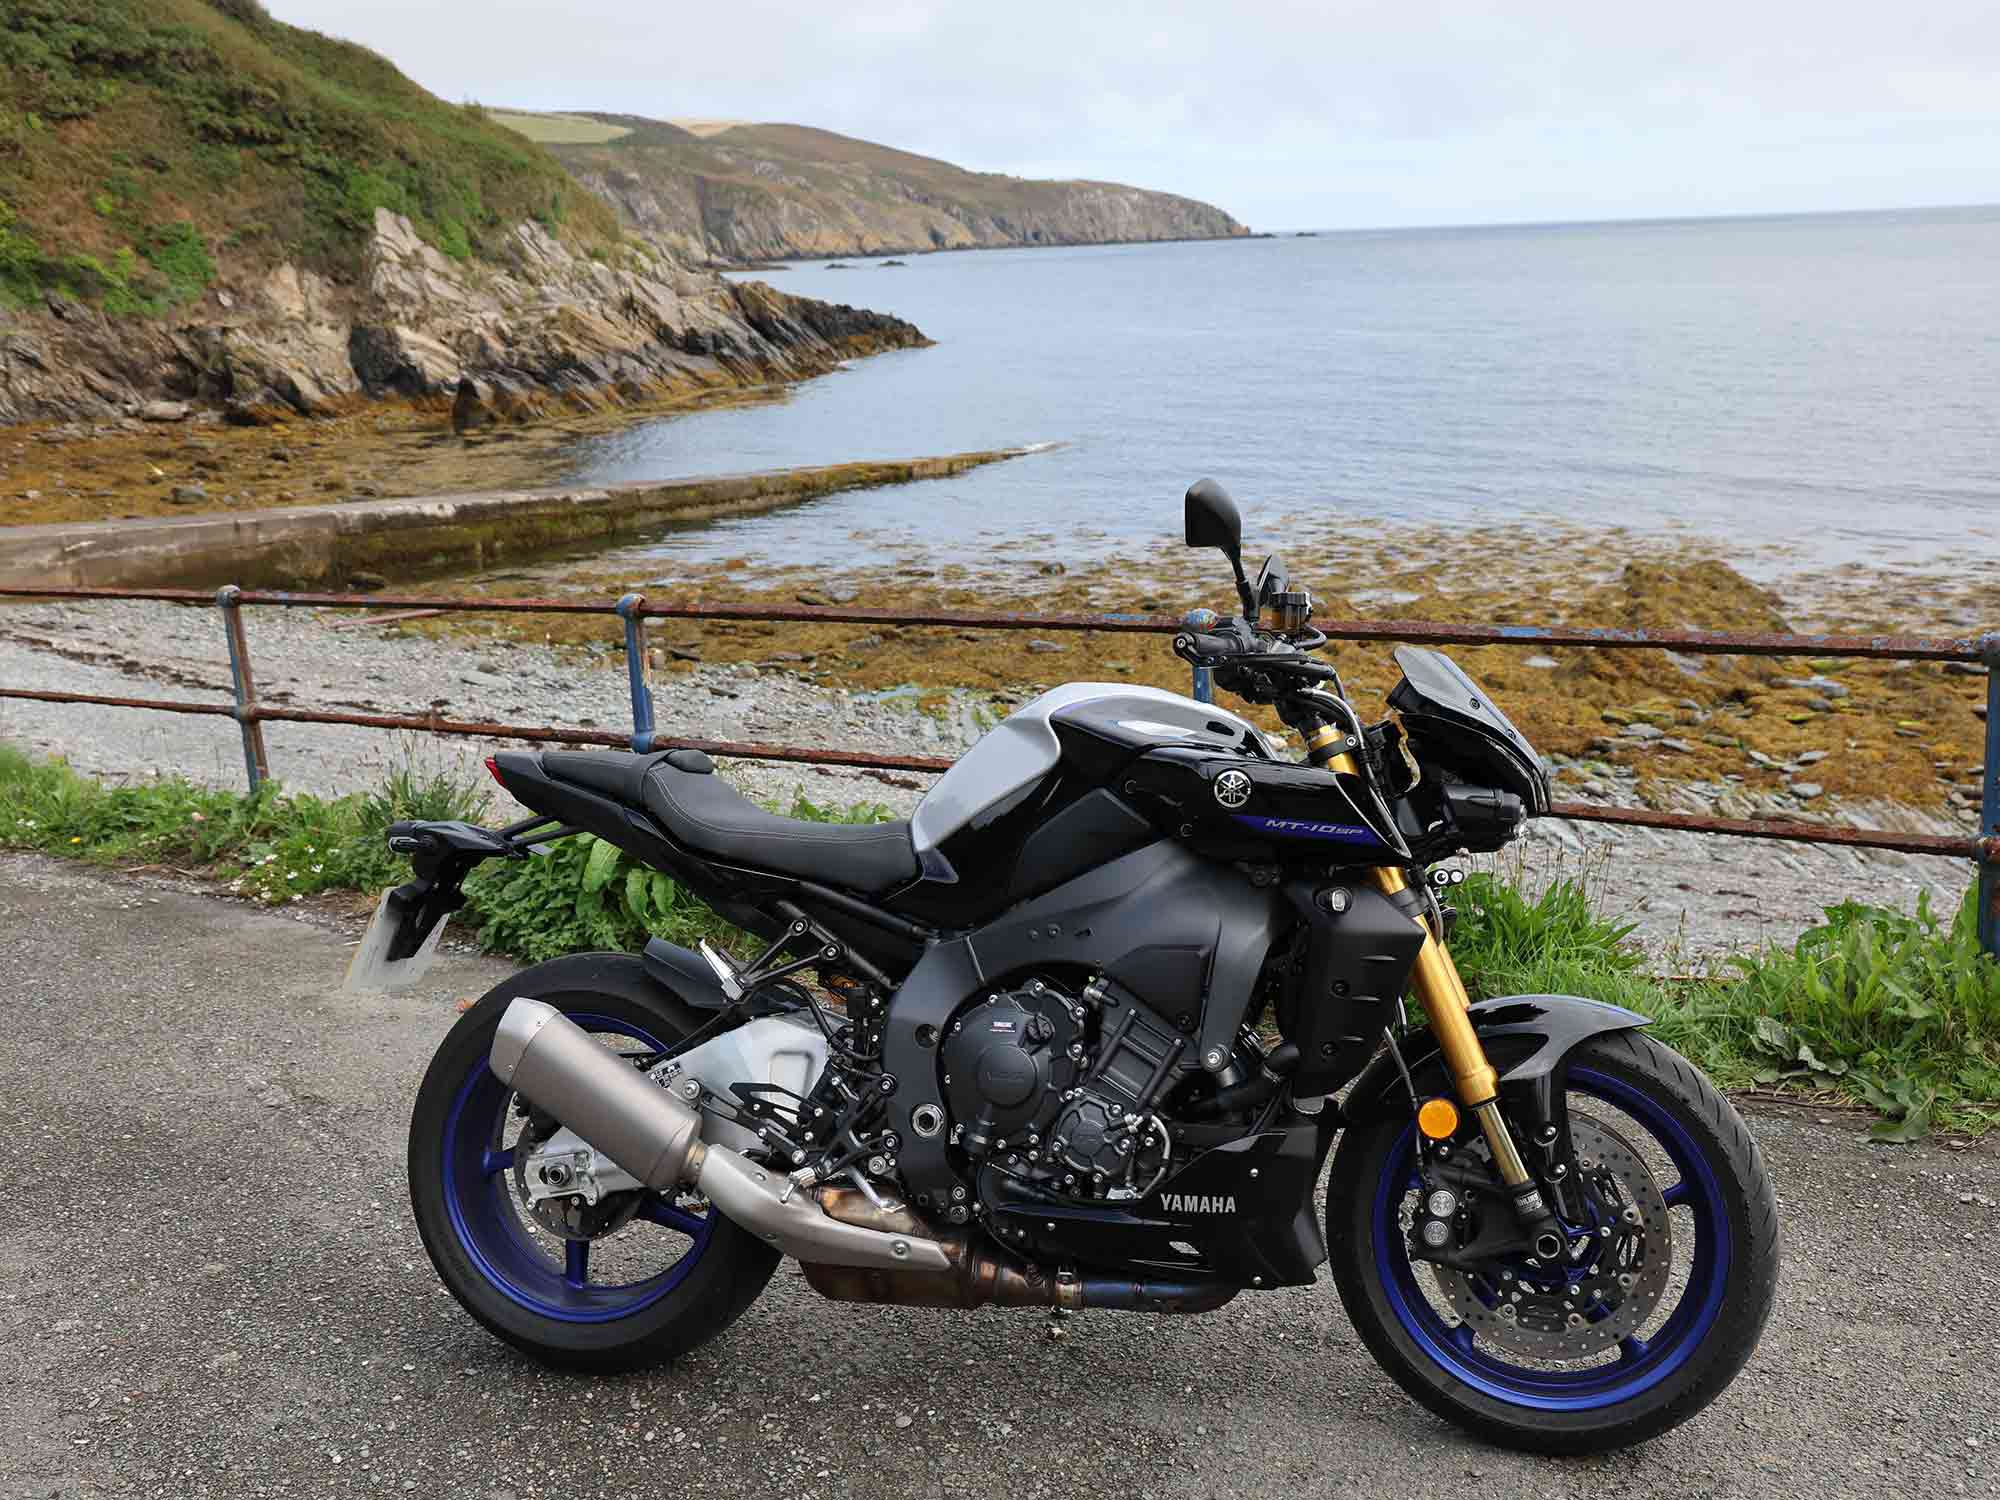 We covered over 1,000 test miles, including a trip to the Isle of Man, with its unrestricted roads.